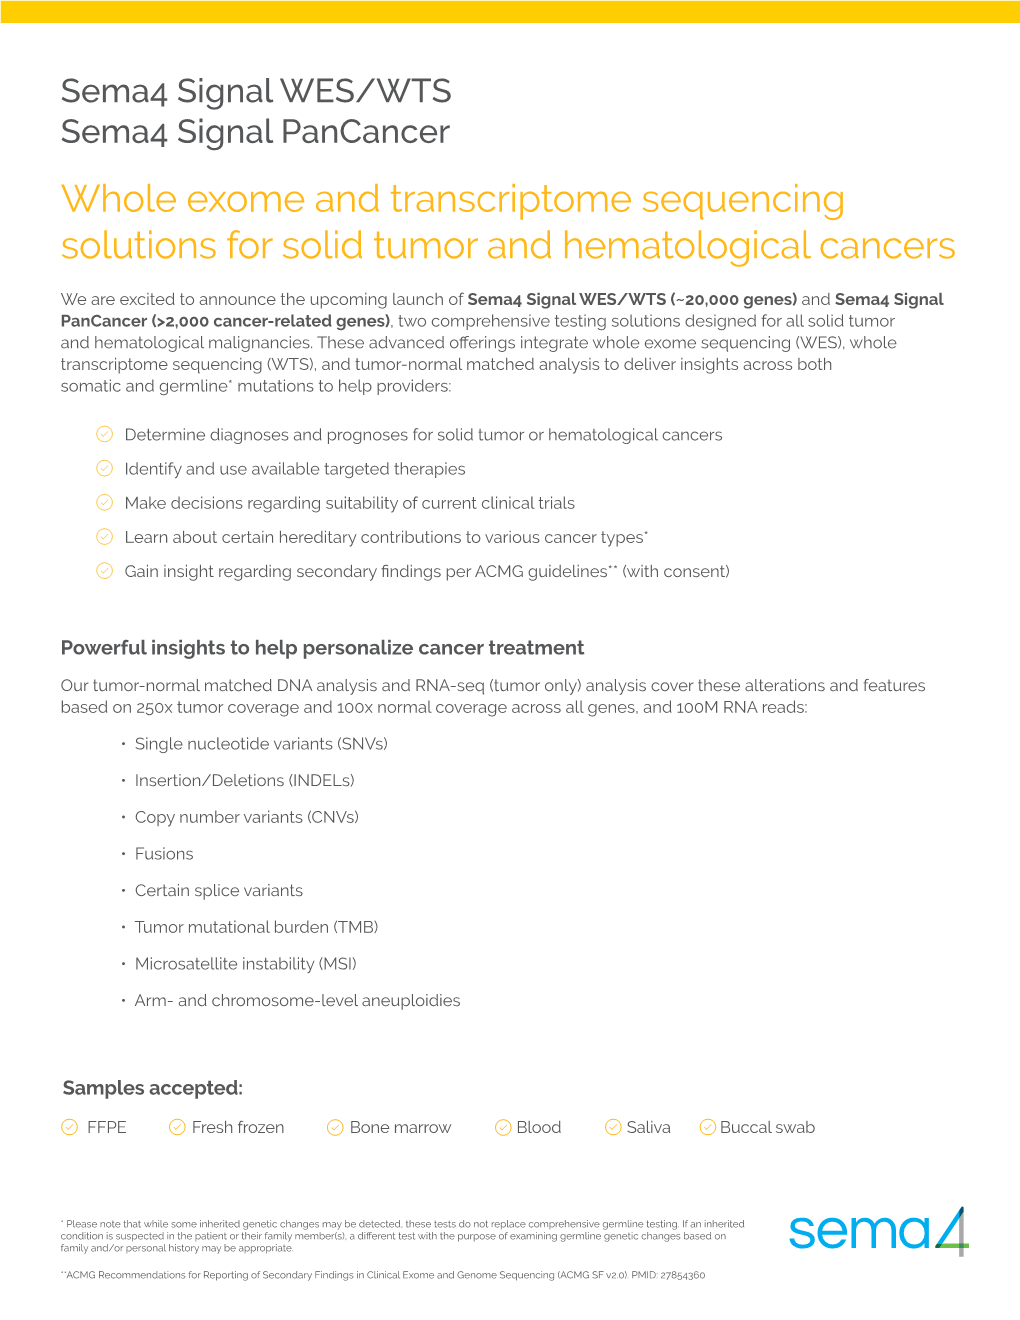 Whole Exome and Transcriptome Sequencing Solutions for Solid Tumor and Hematological Cancers